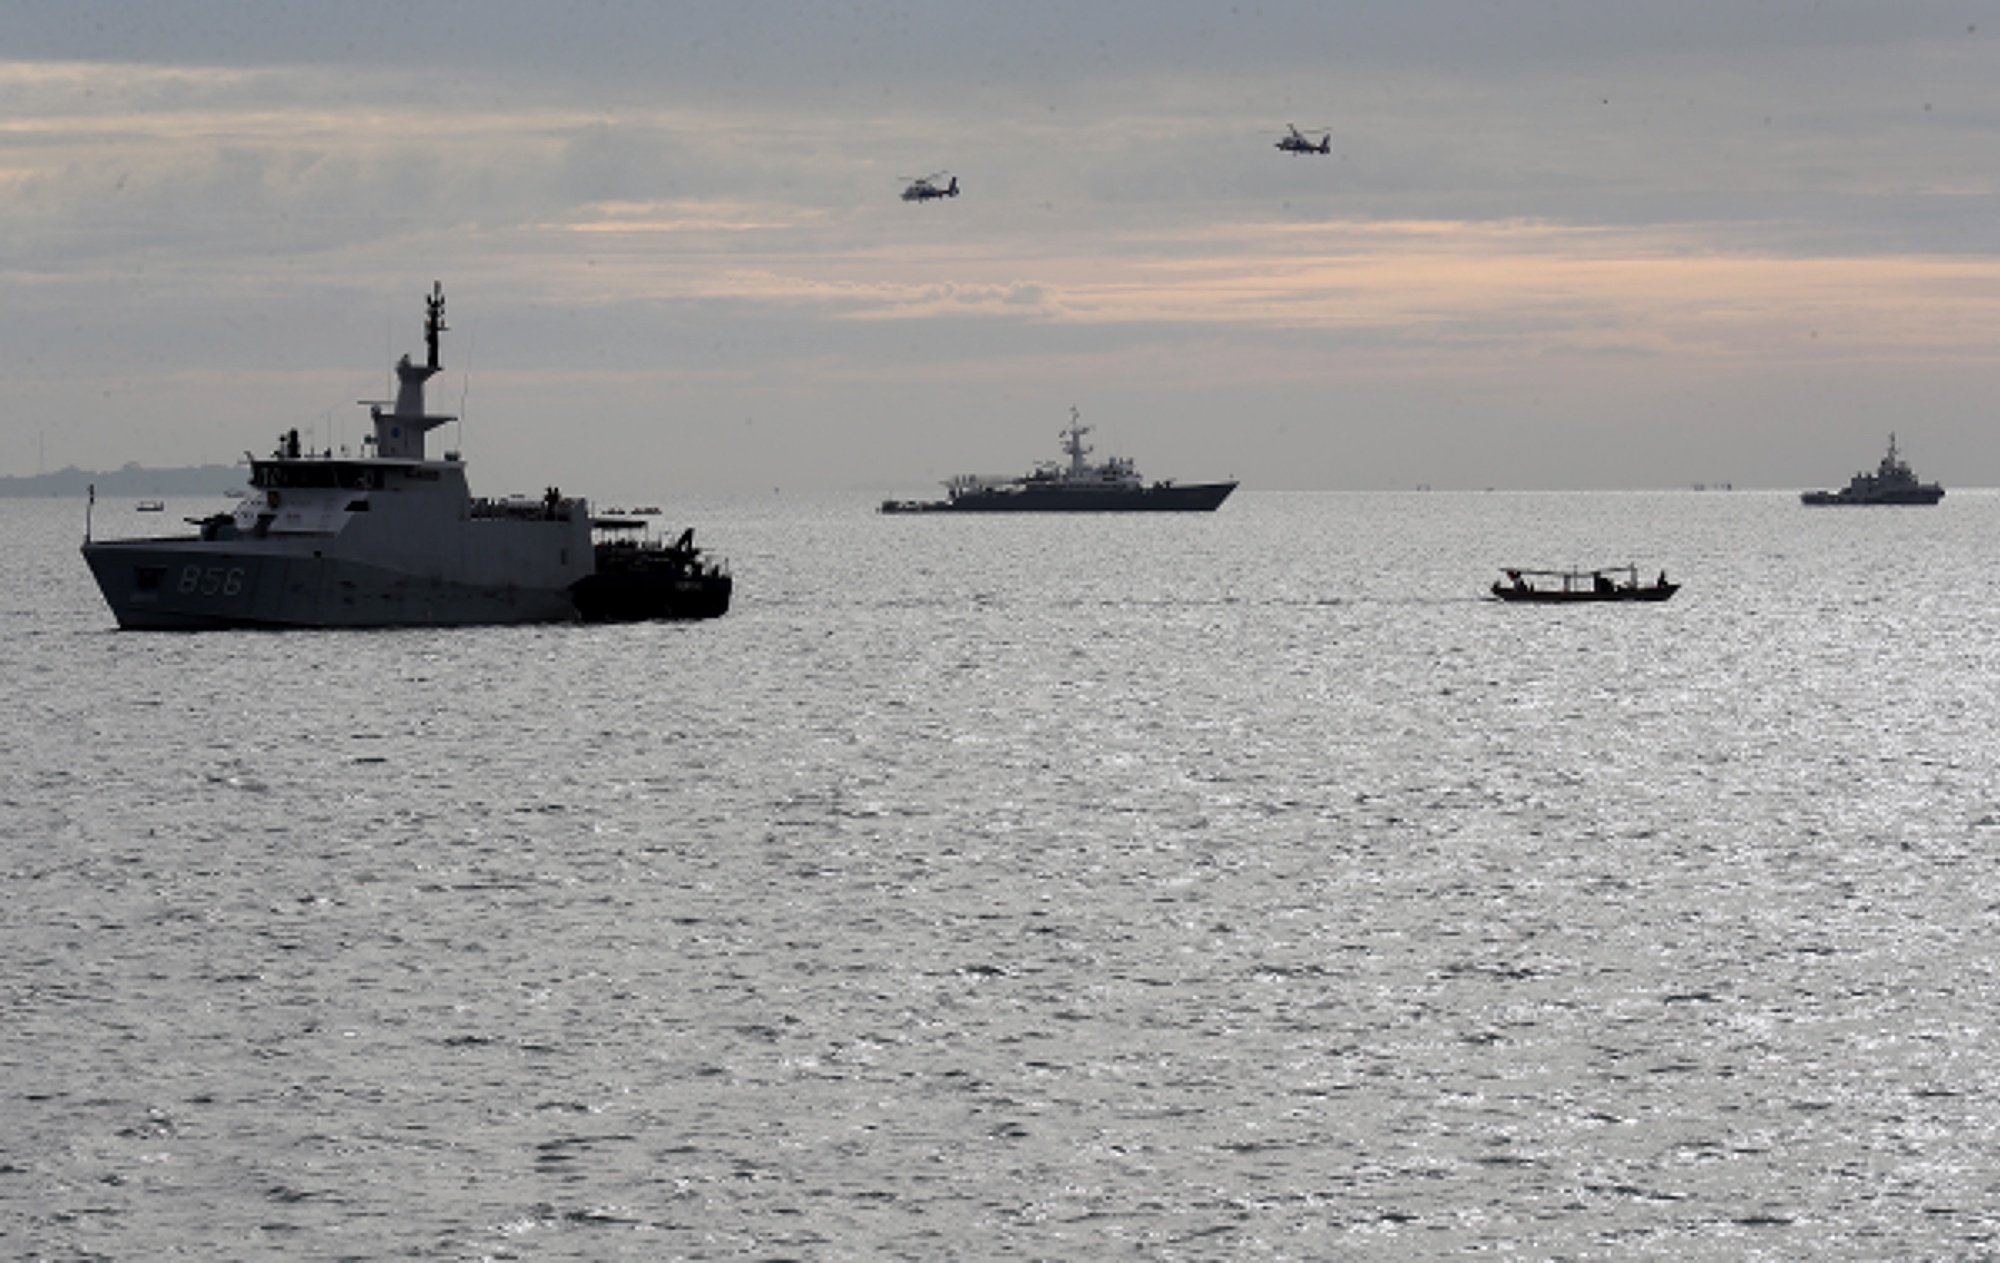 epa08929639 Helicopters and Navy ships are seem during a search and rescue operation near the suspected crash site of Sriwijaya Air flight SJ182 in the waters off Jakarta, Indonesia, 10 January 2021. Contact to Sriwijaya Air flight SJ182 was lost on 09 January 2021 shortly after the aircraft took off from Jakarta International Airport while en route to Pontianak in West Kalimantan province.  EPA/Bagus Indahono